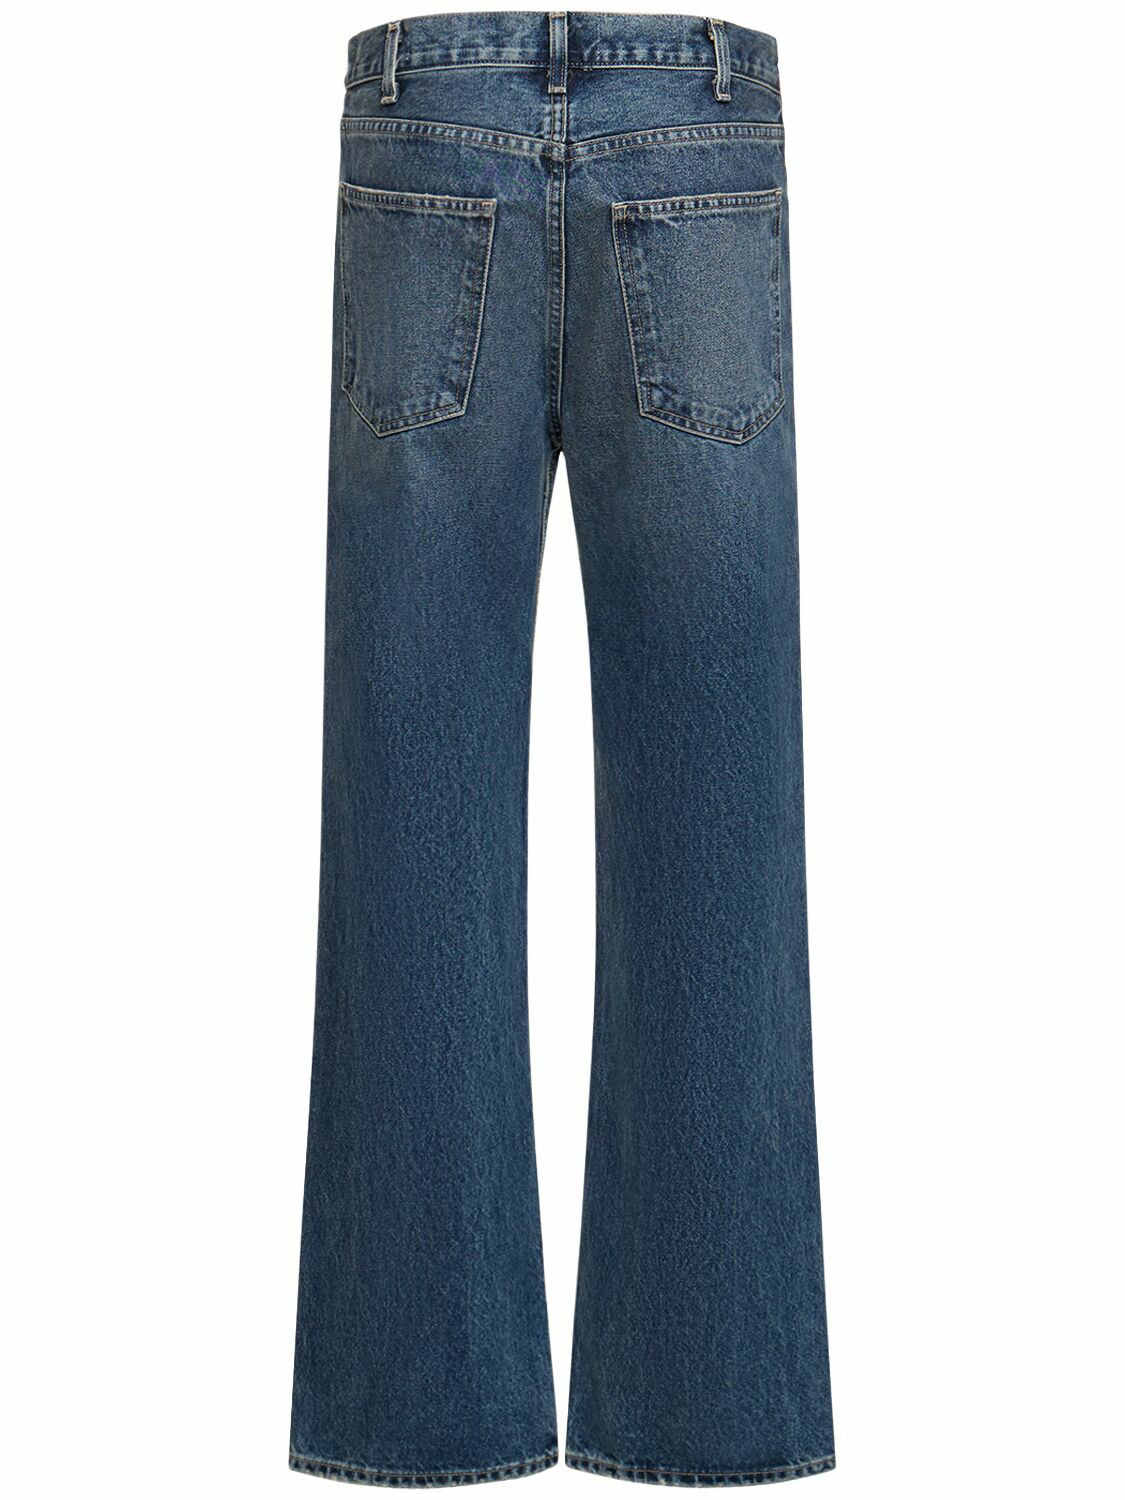 Mitchell high-rise jeans